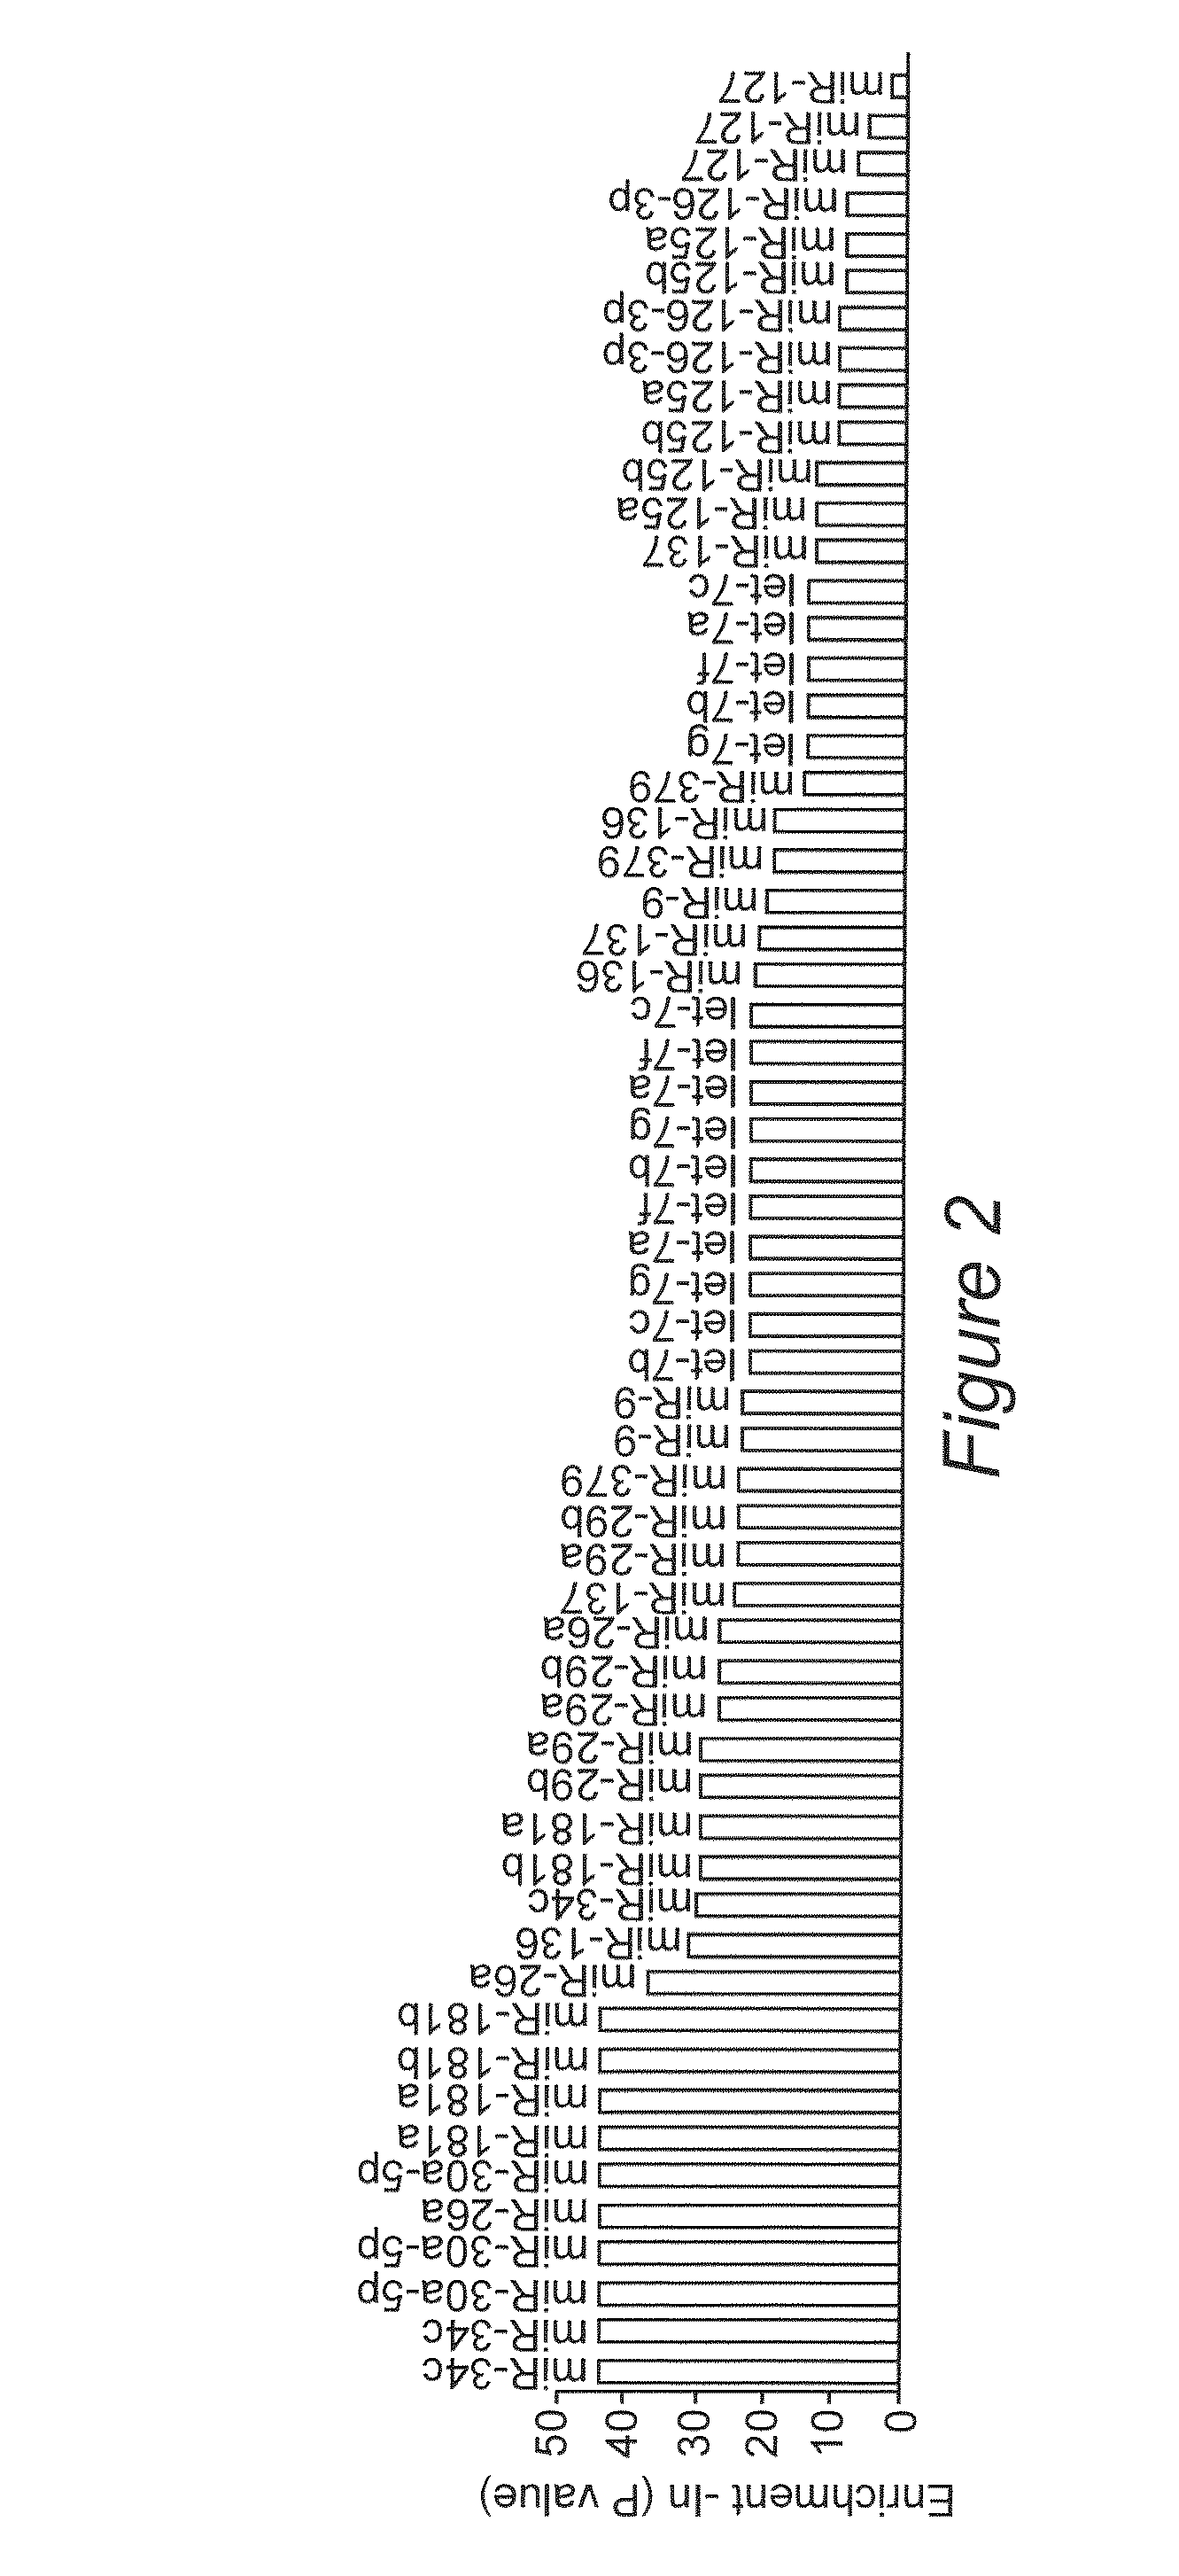 Method for preventing or treating memory impairment and pharmaceutical compositions useful therefore